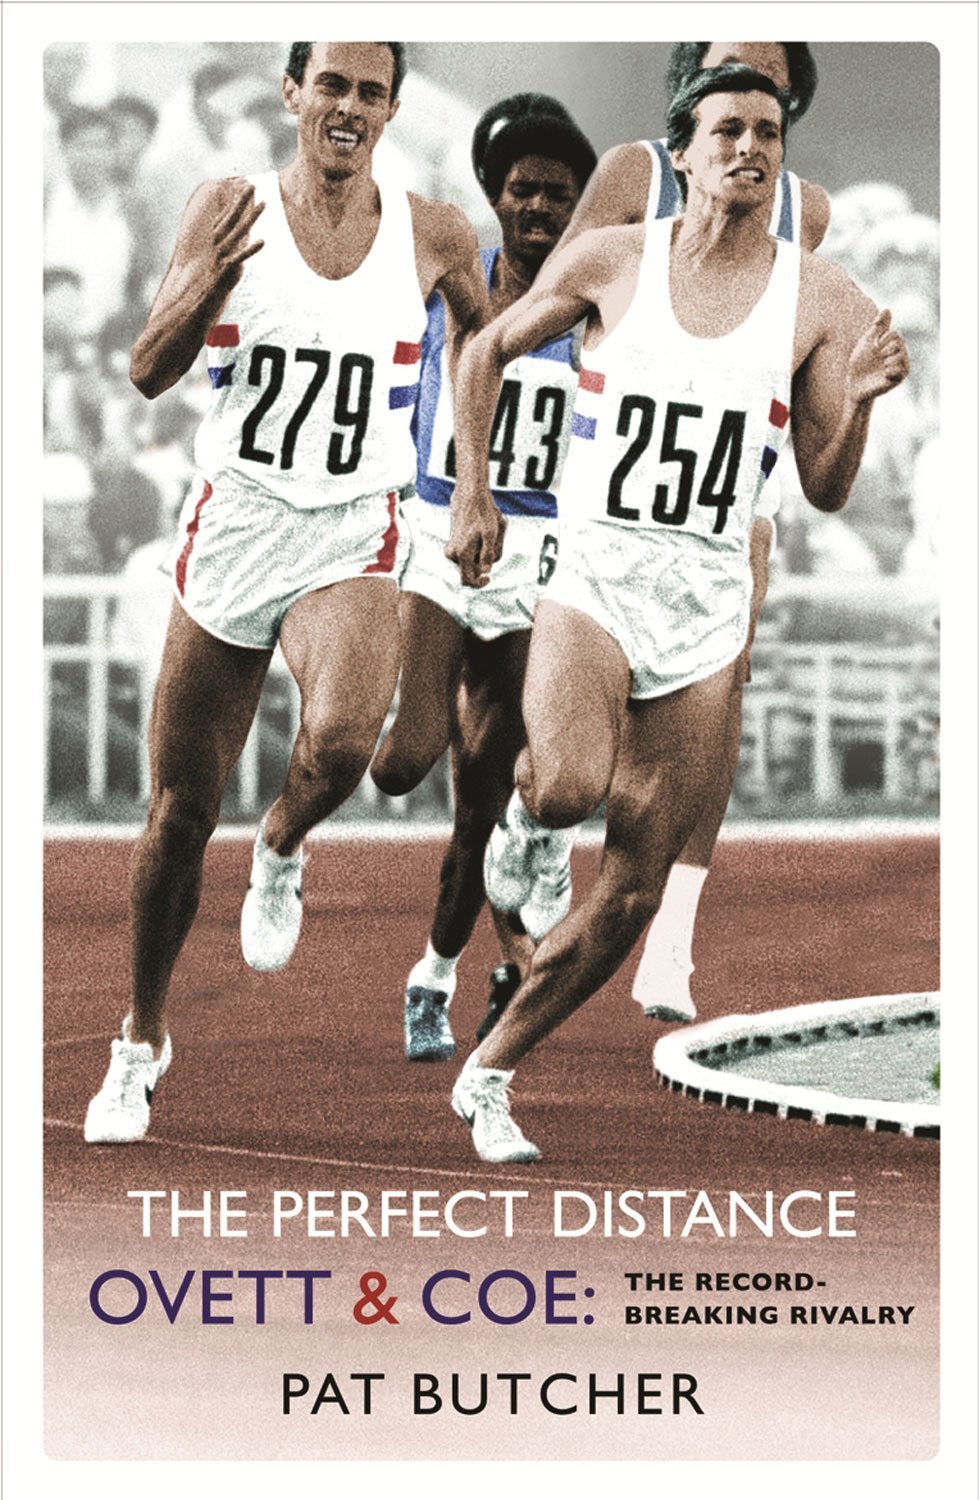 The new film about Sebastian Coe and Steve Ovett is based on Pat Butcher's book, The Perfect Distance